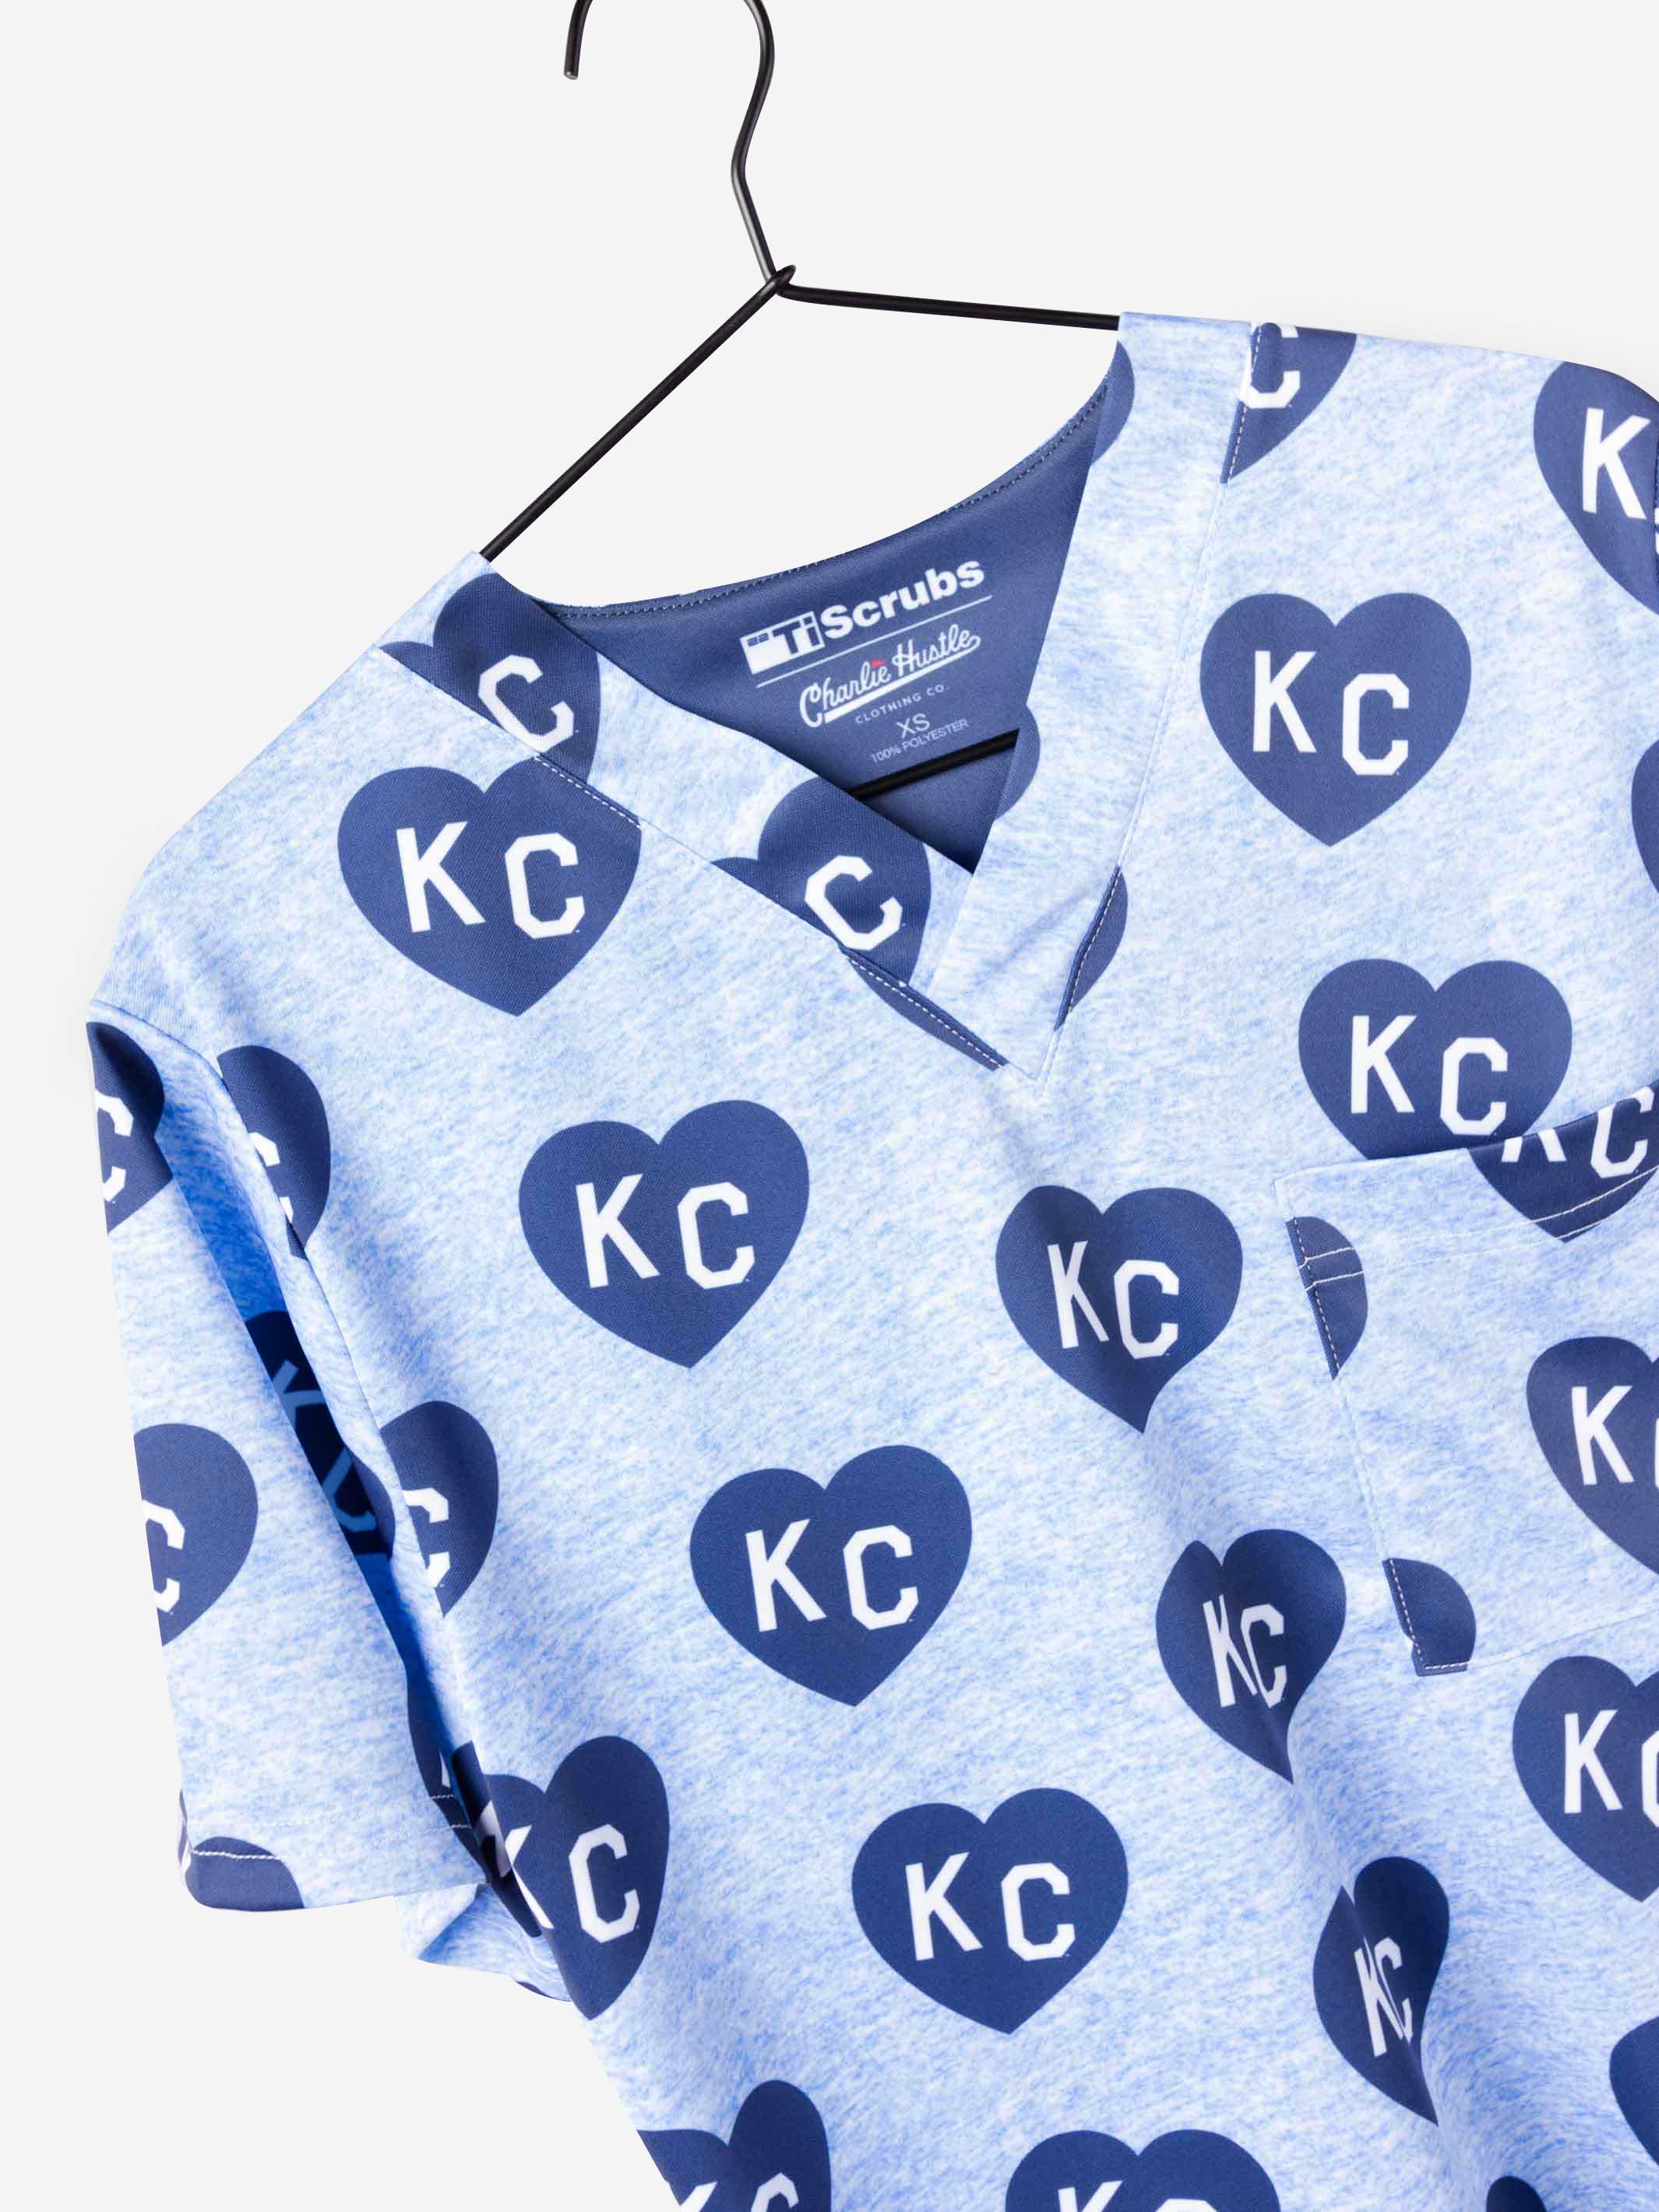 Men&#39;s Charlie Hustle Print Scrub Top with KC Heart All Over Pattern in Navy and Ceil Blue and heather gray